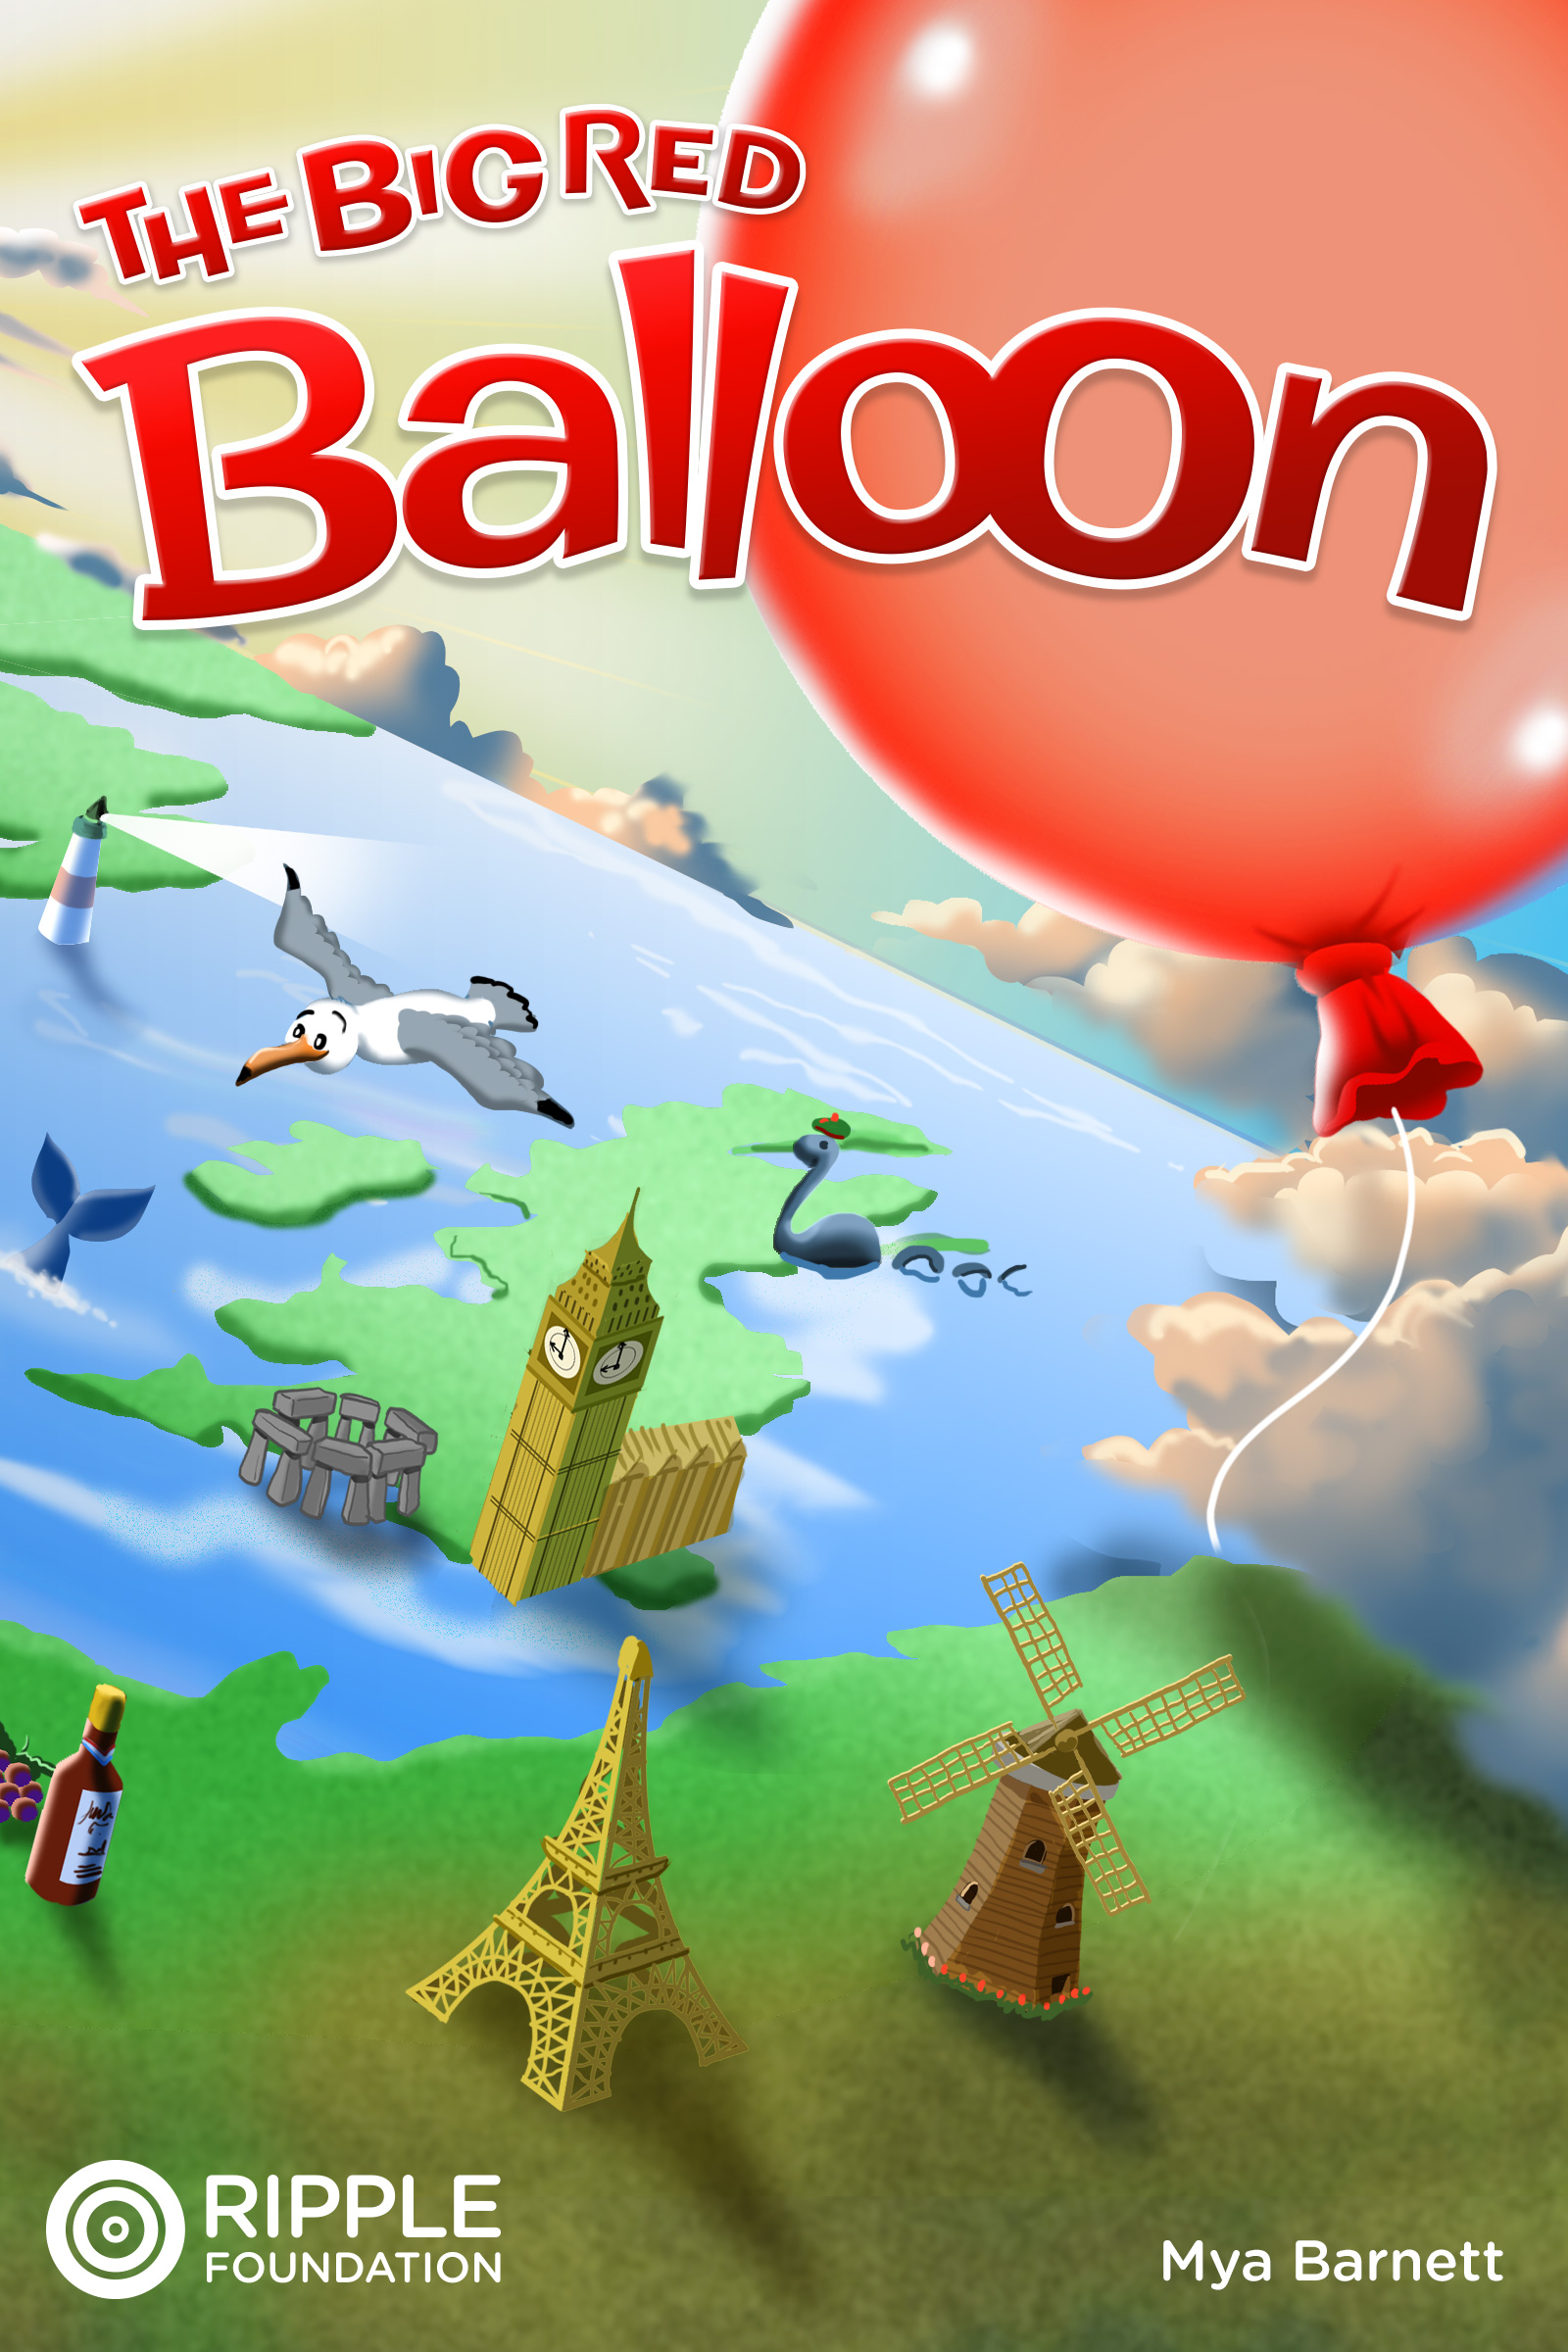 The Big Red Balloon